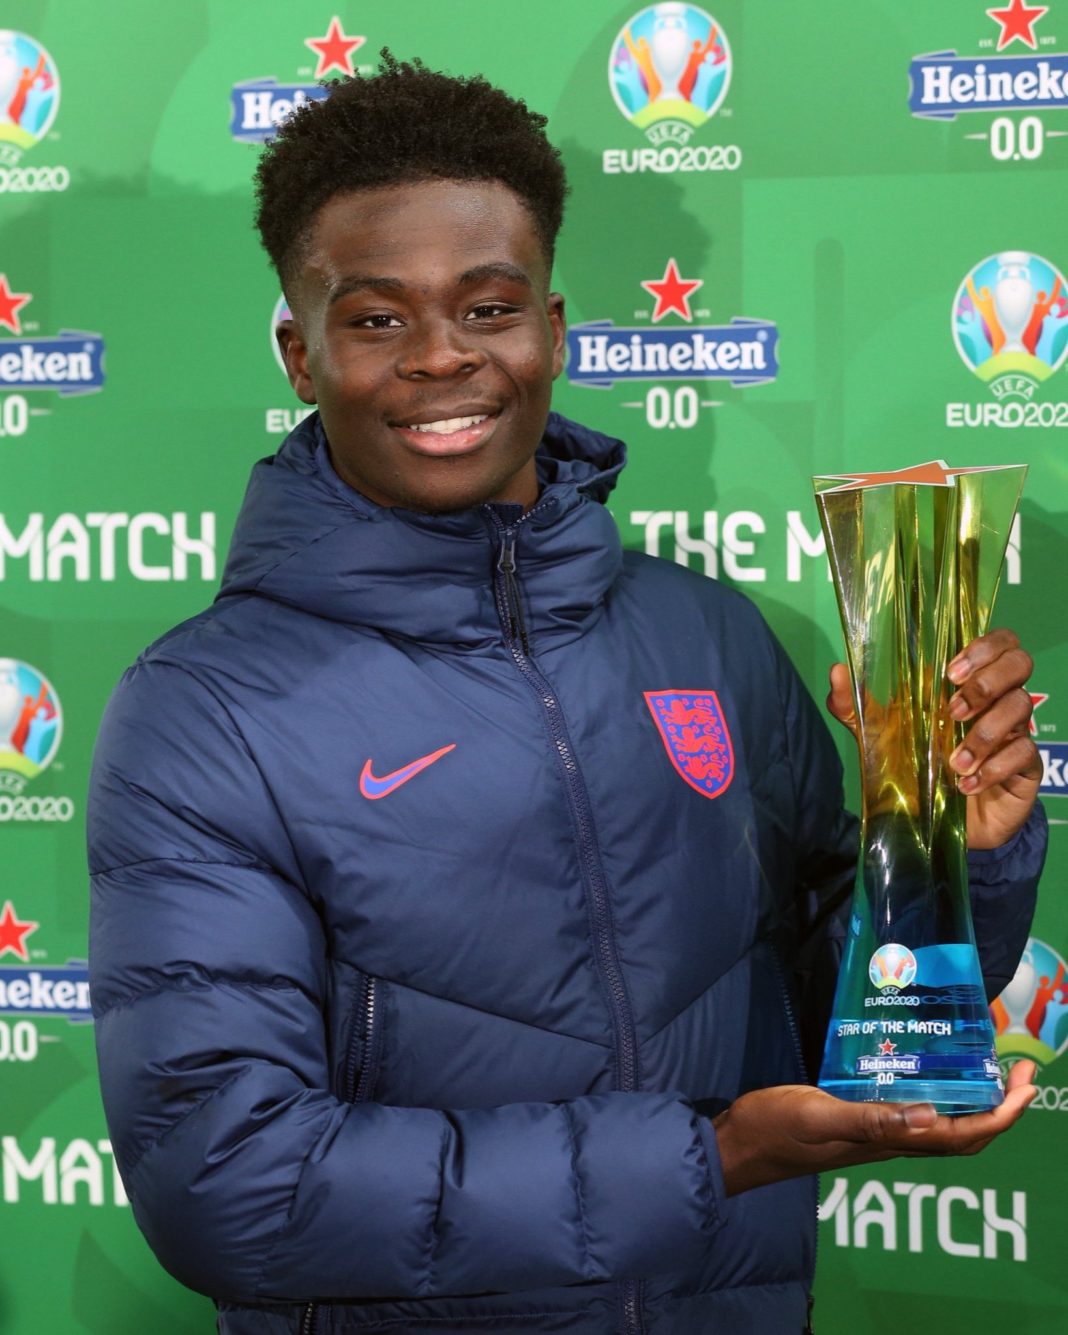 Bukayo Saka with his Star of the Match award after his performance for England at Euro 2020 (Photo via Saka on Twitter)